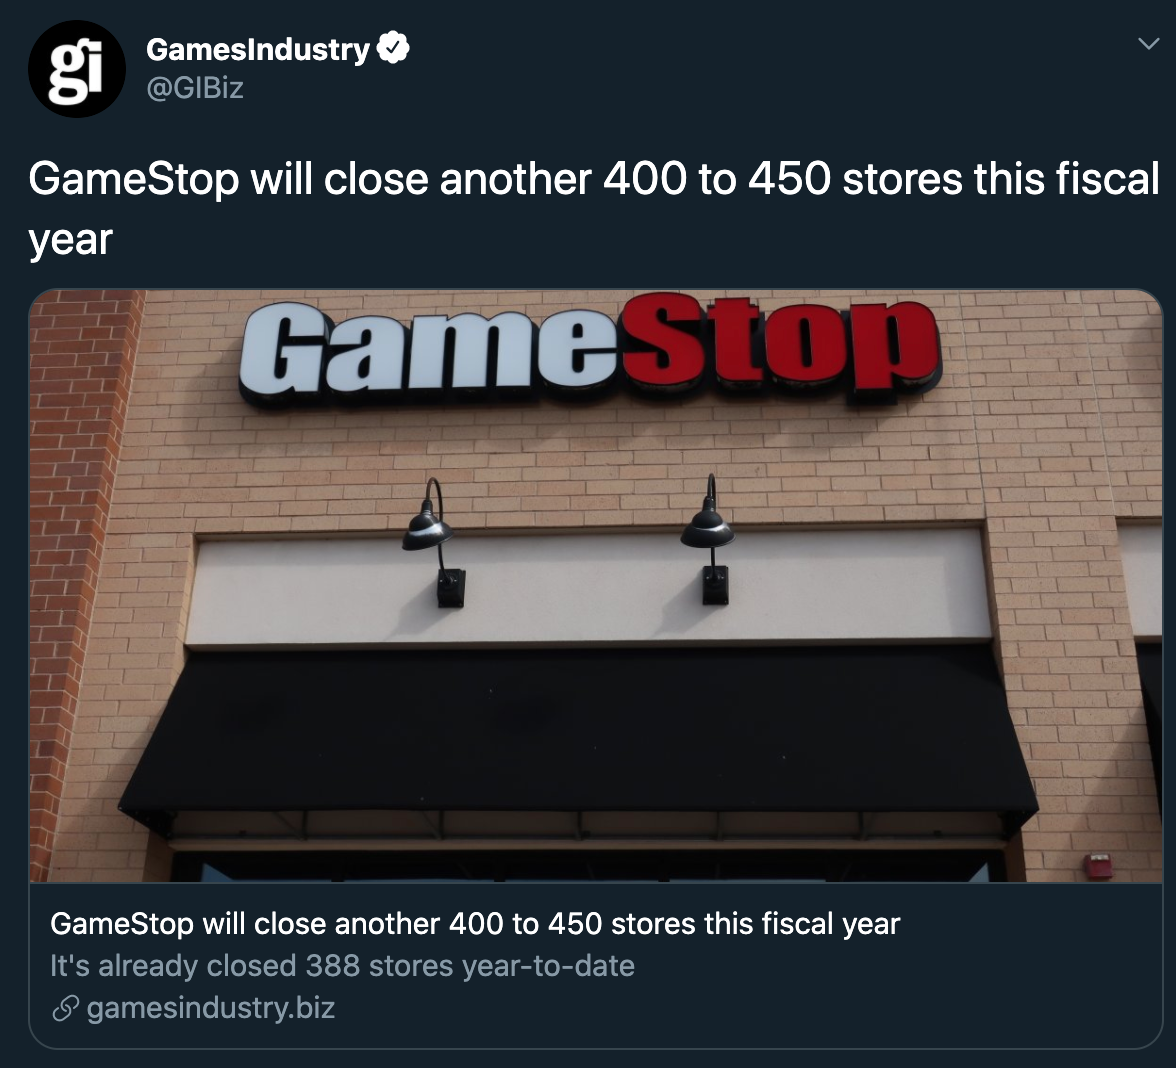 gamestop will close another 400 to 450 stores this fiscal year